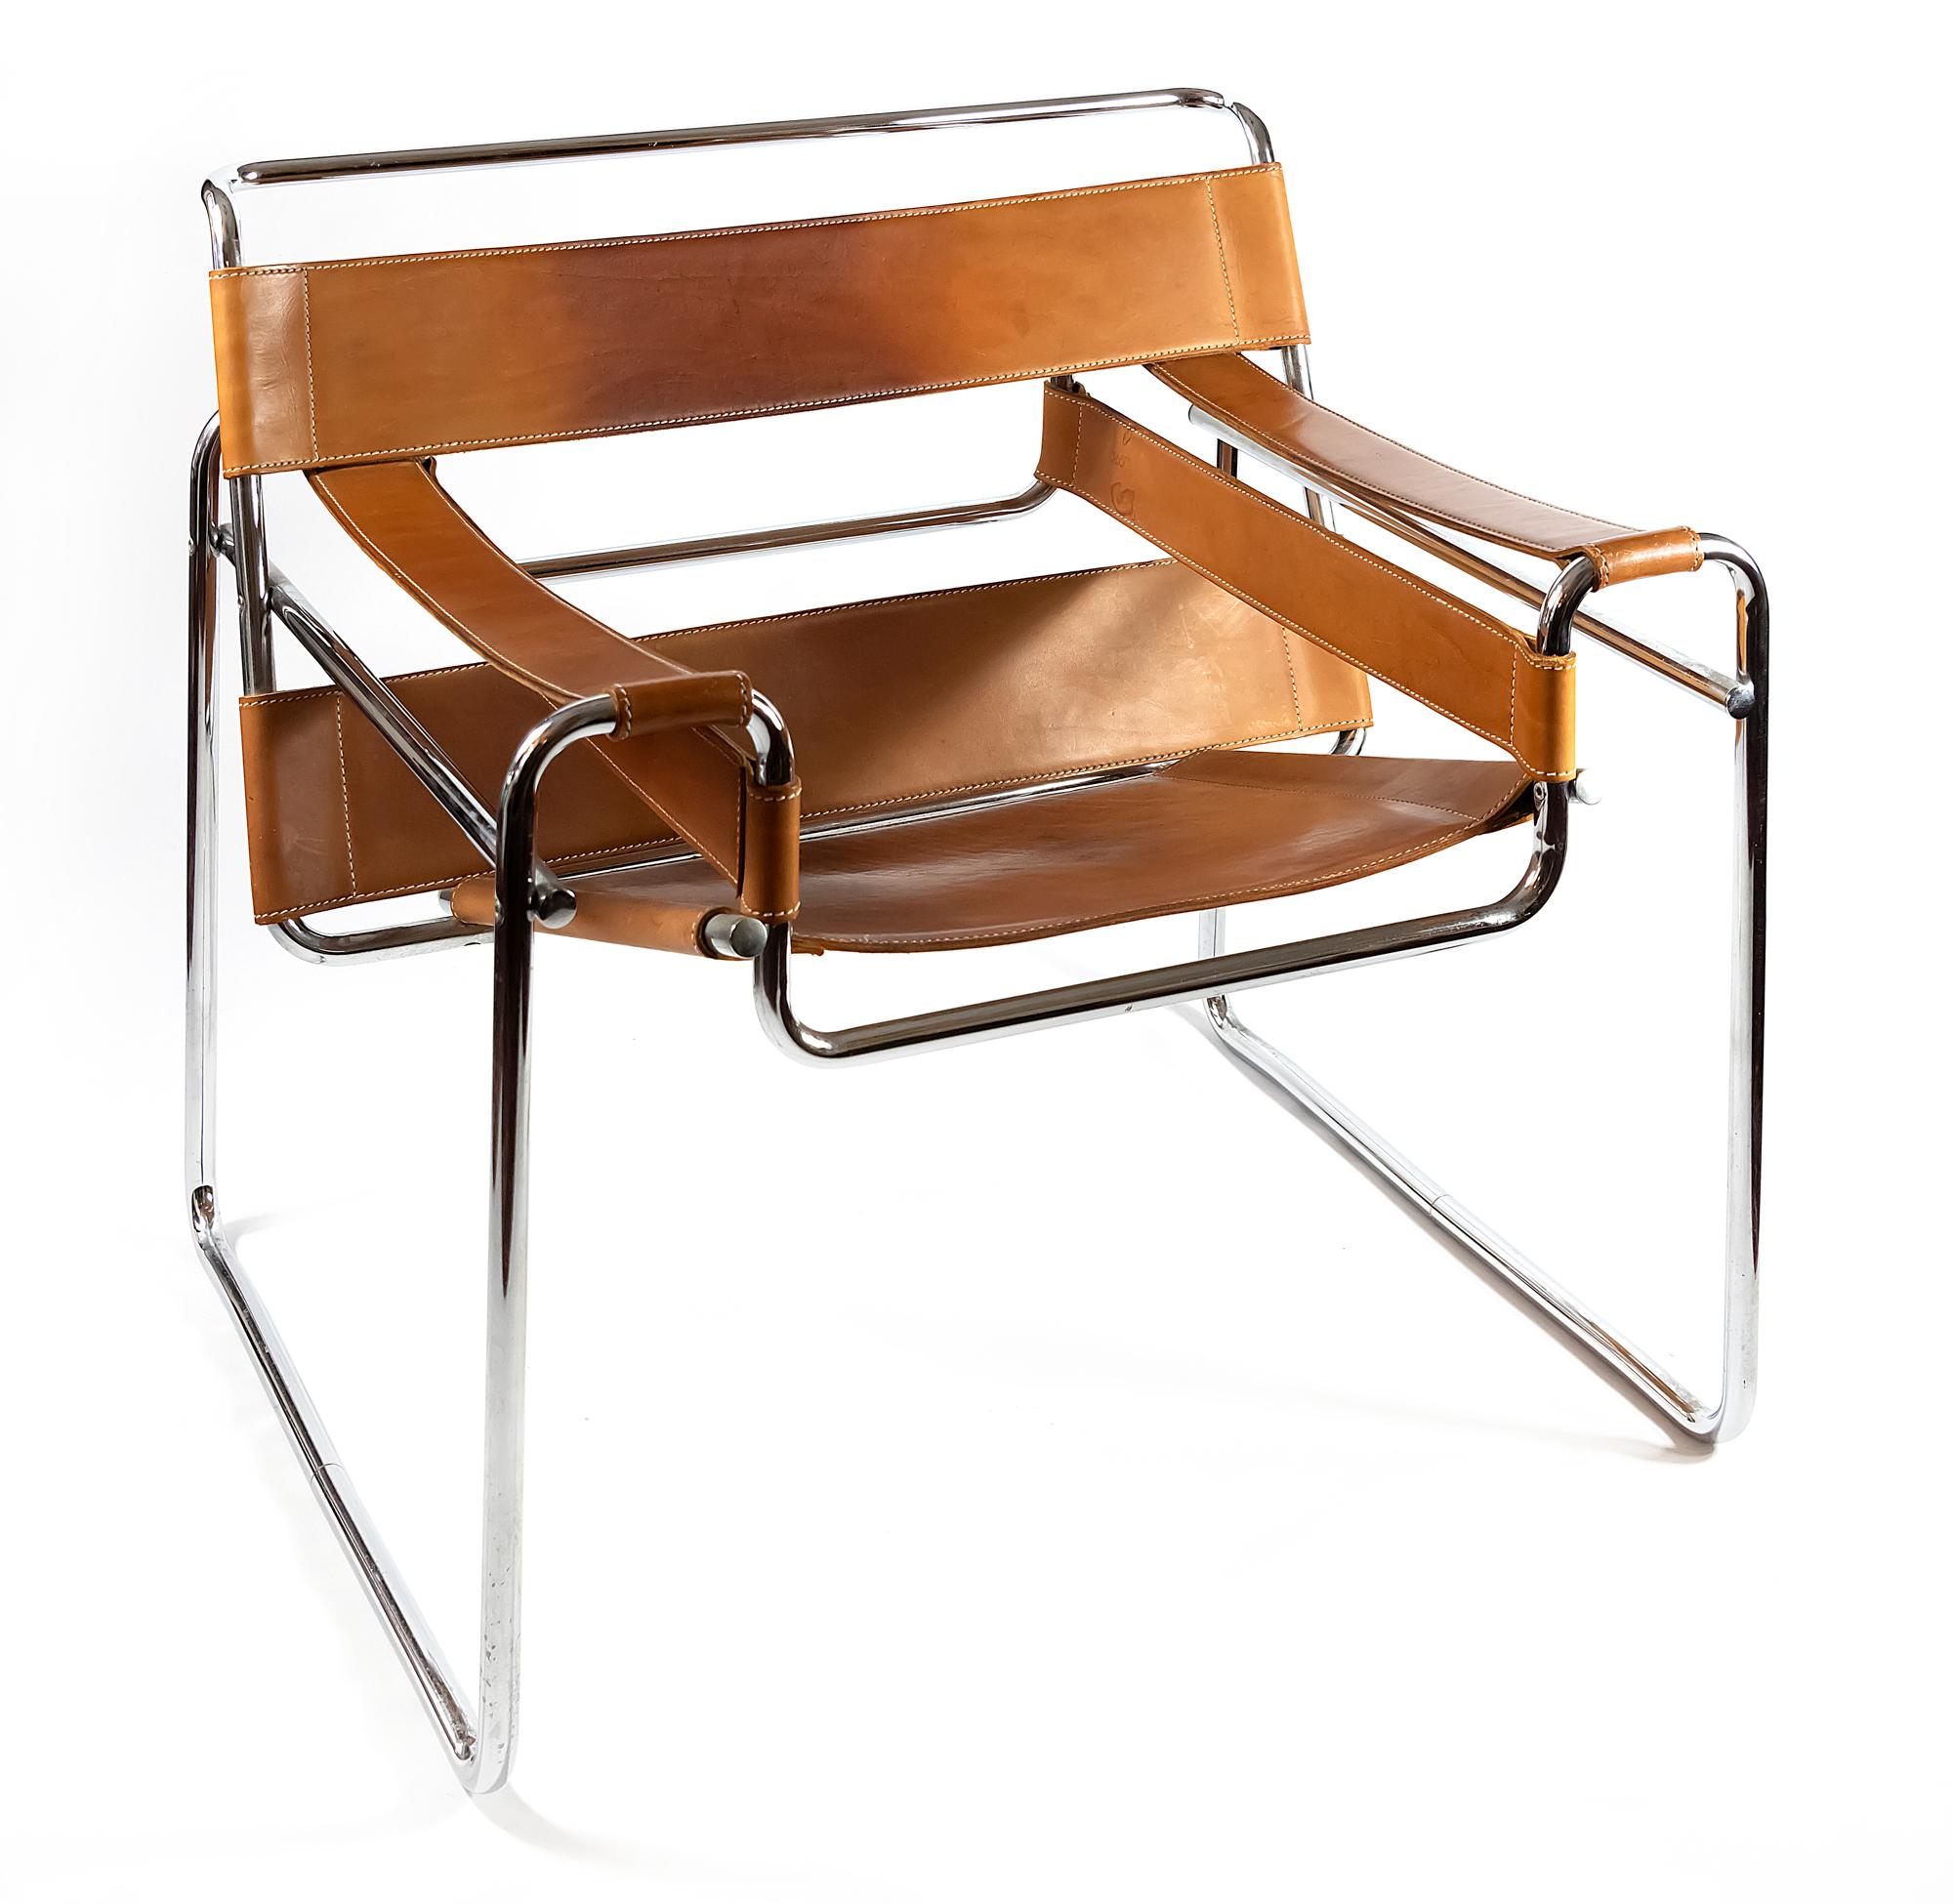 Pair of Wassily Chairs, designed by Marcel Breuer around 1925.
Manufactured circa 1980s, brown (cognac) leather, chromed steel tube frame.

